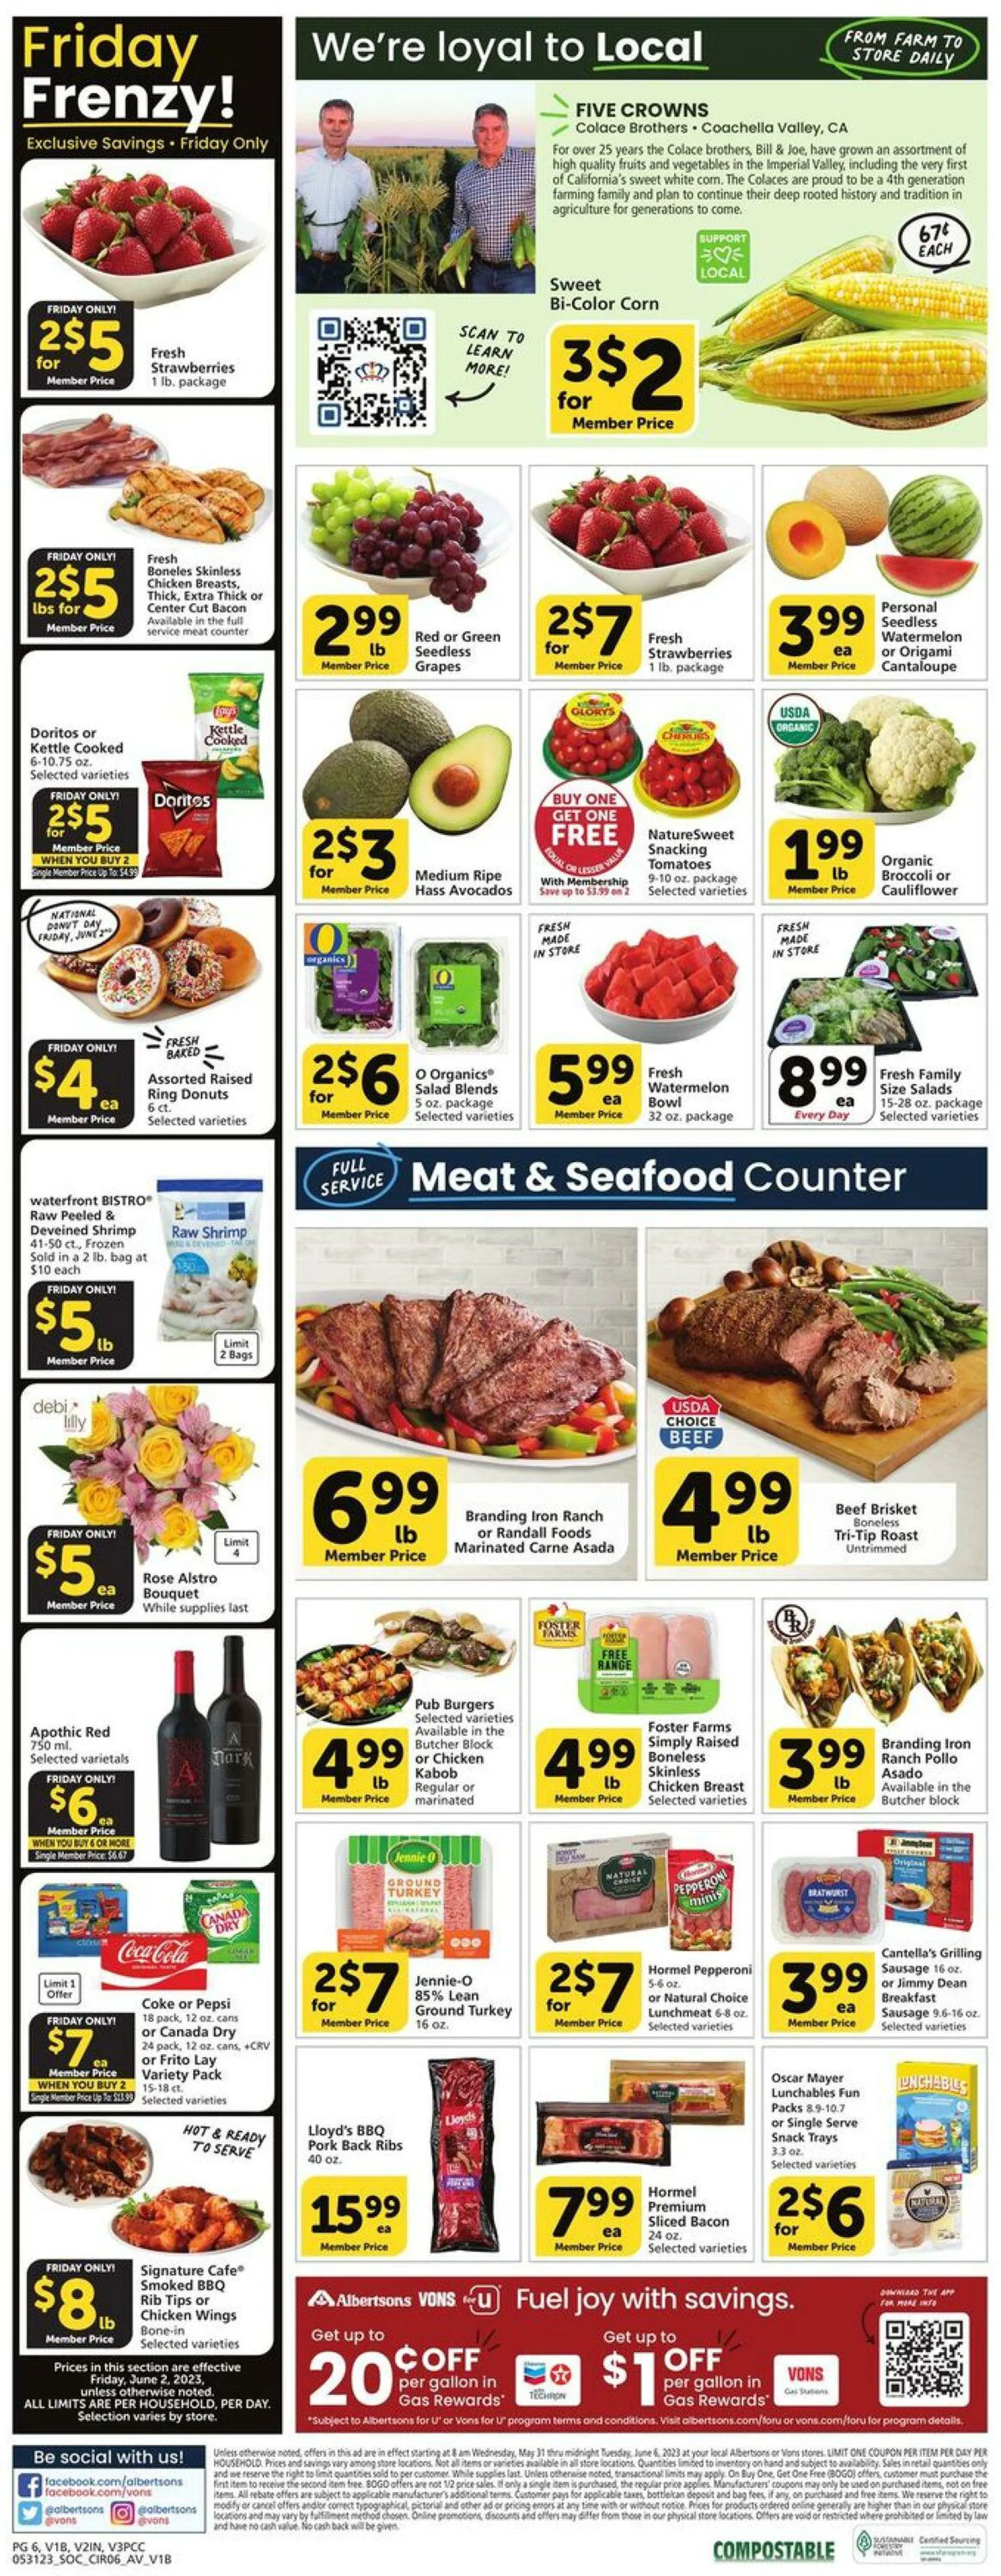 Vons Current weekly ad - 6